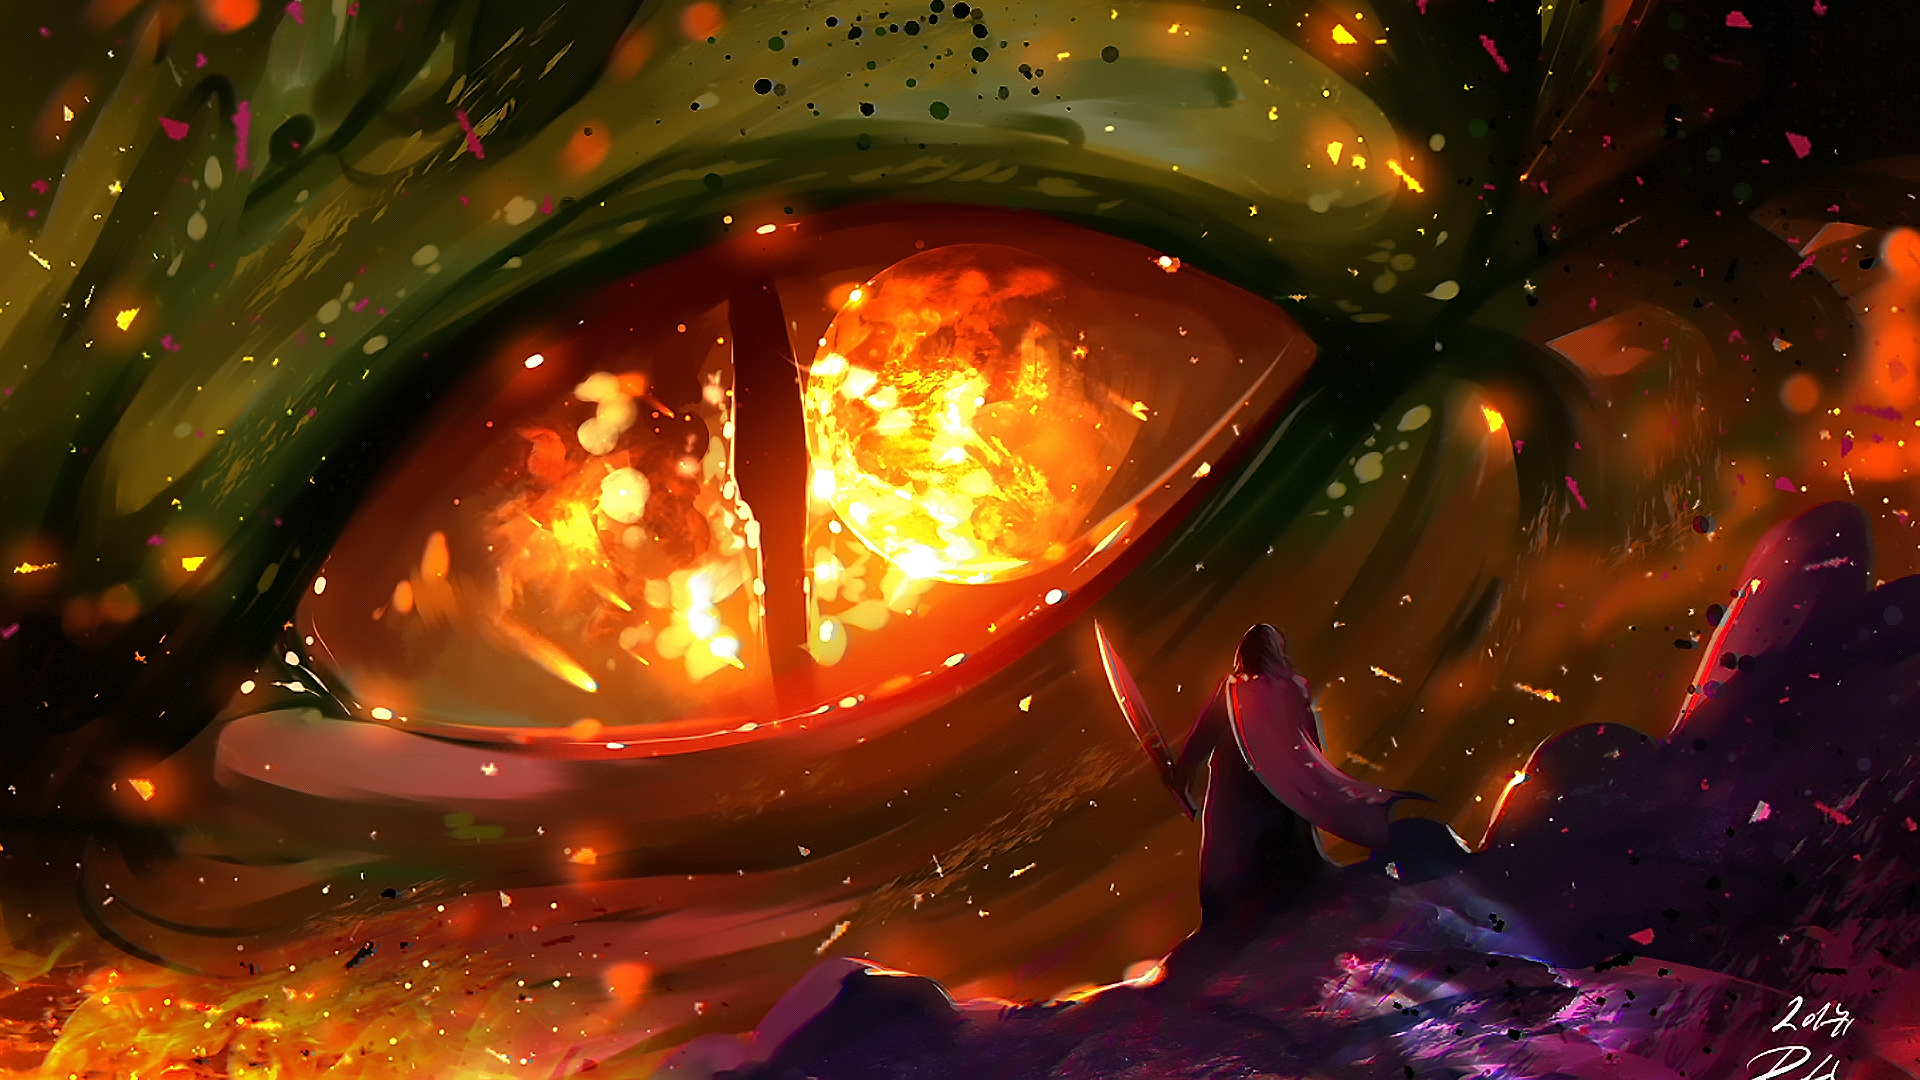 Download 1920x1080 Dragon, Eye, Close Up, Knight, Fire, Painting Wallpaper For Widescreen